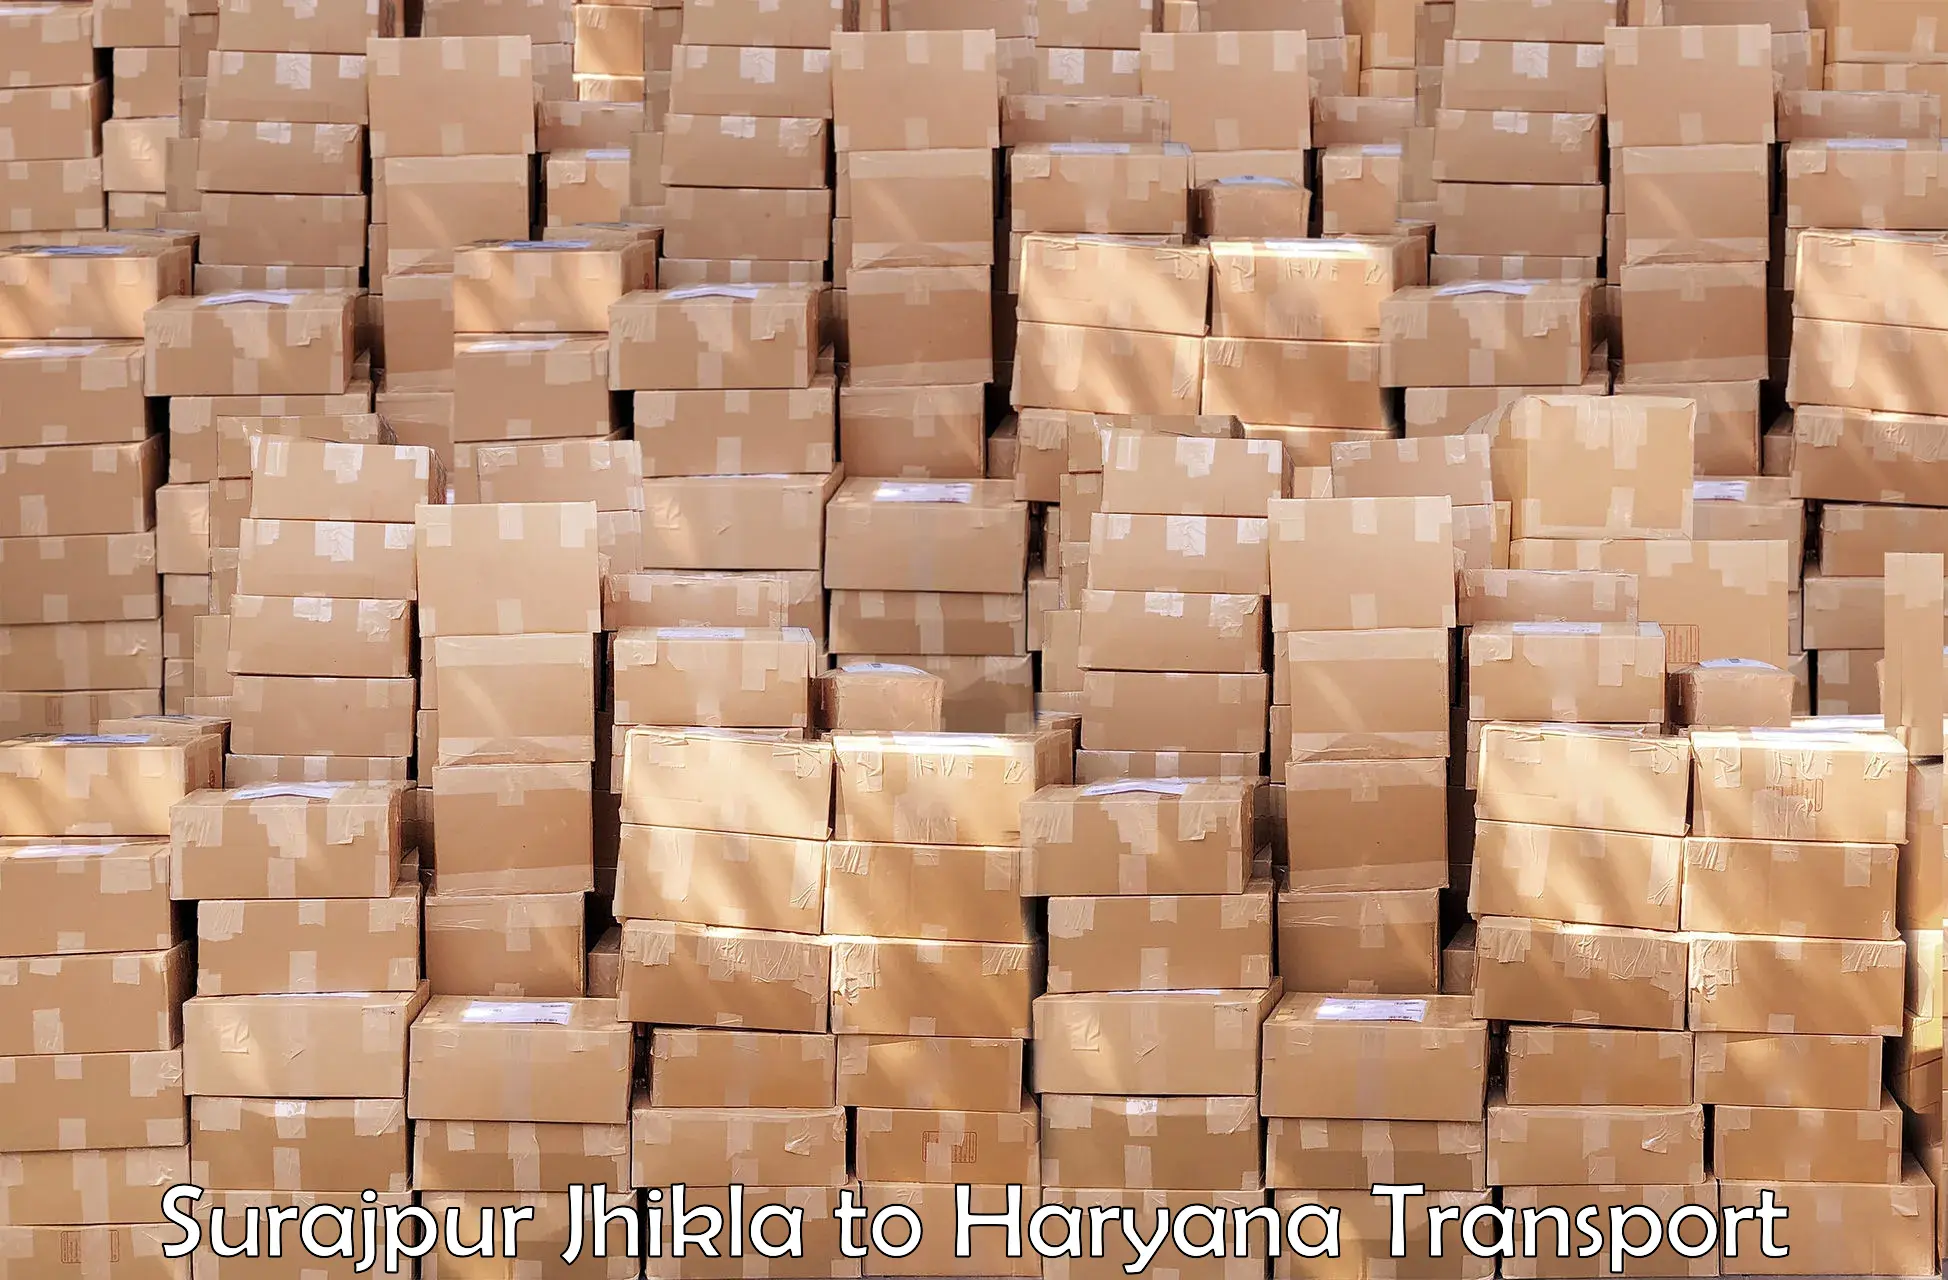 Cargo train transport services in Surajpur Jhikla to Palwal